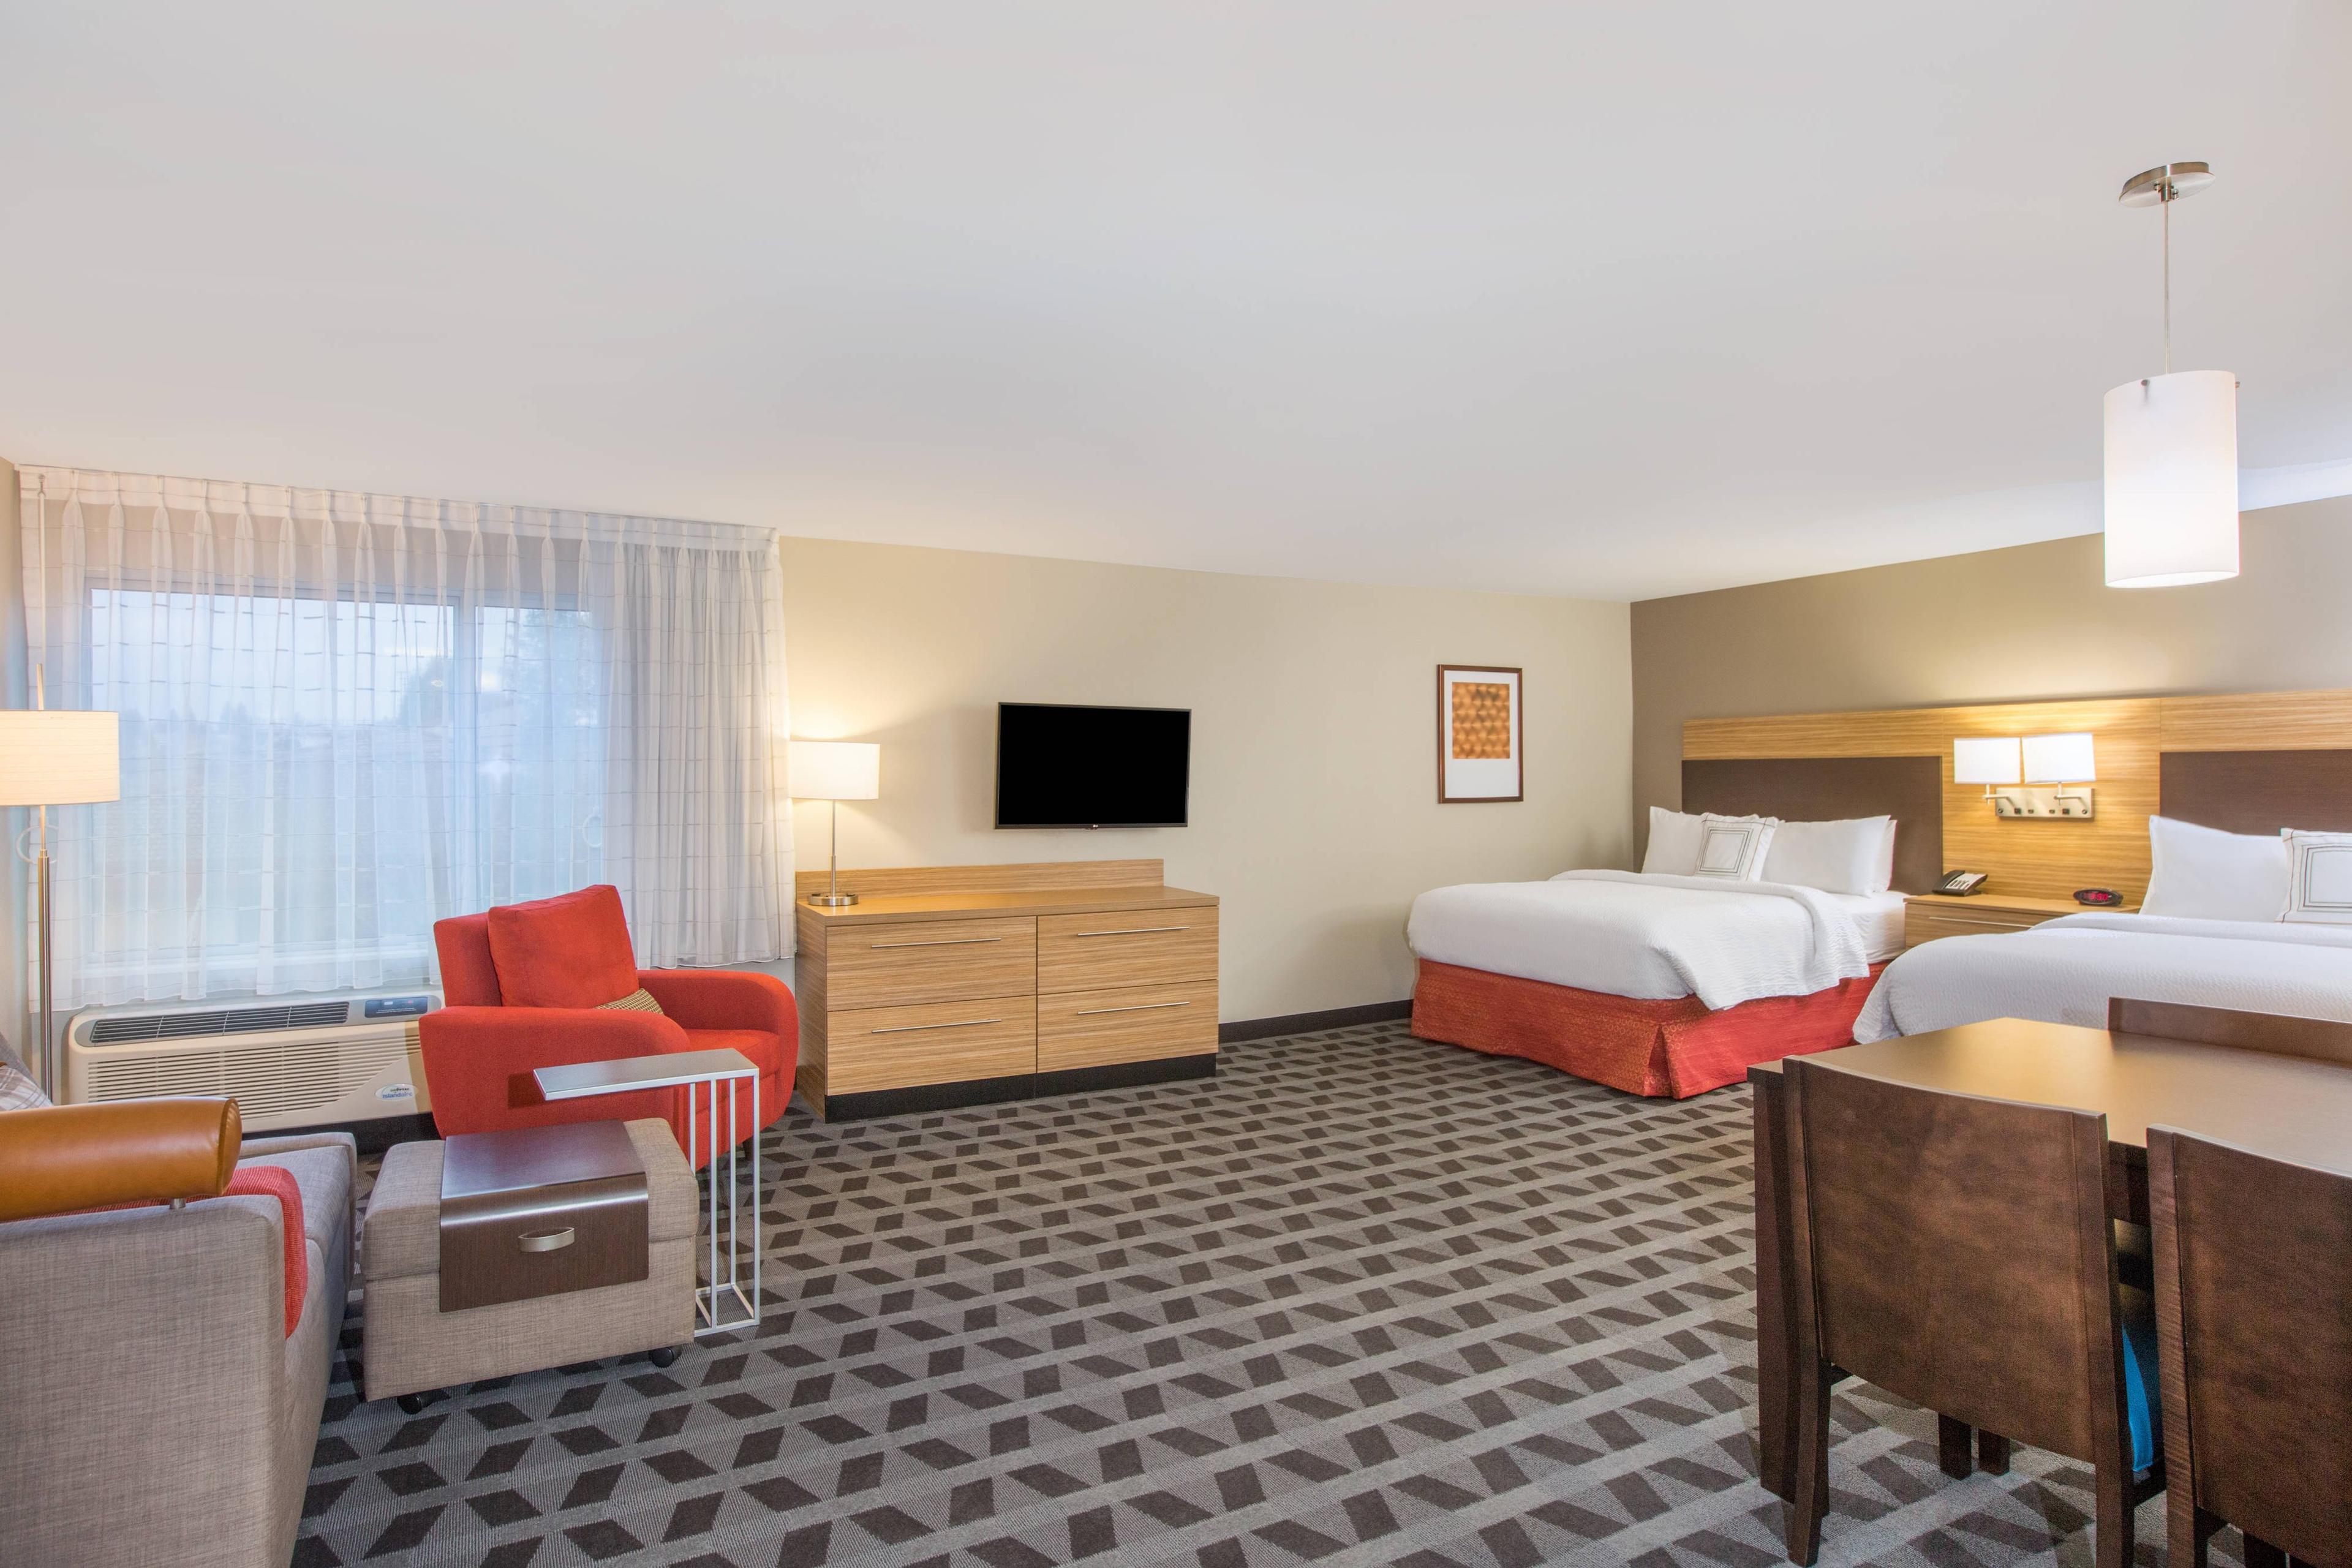 Our spacious Queen/Queen Studio Suite includes perfect amenities for longer stays. With a full kitchenette, four person table top, high definition TV, iron, coffee maker and much more!